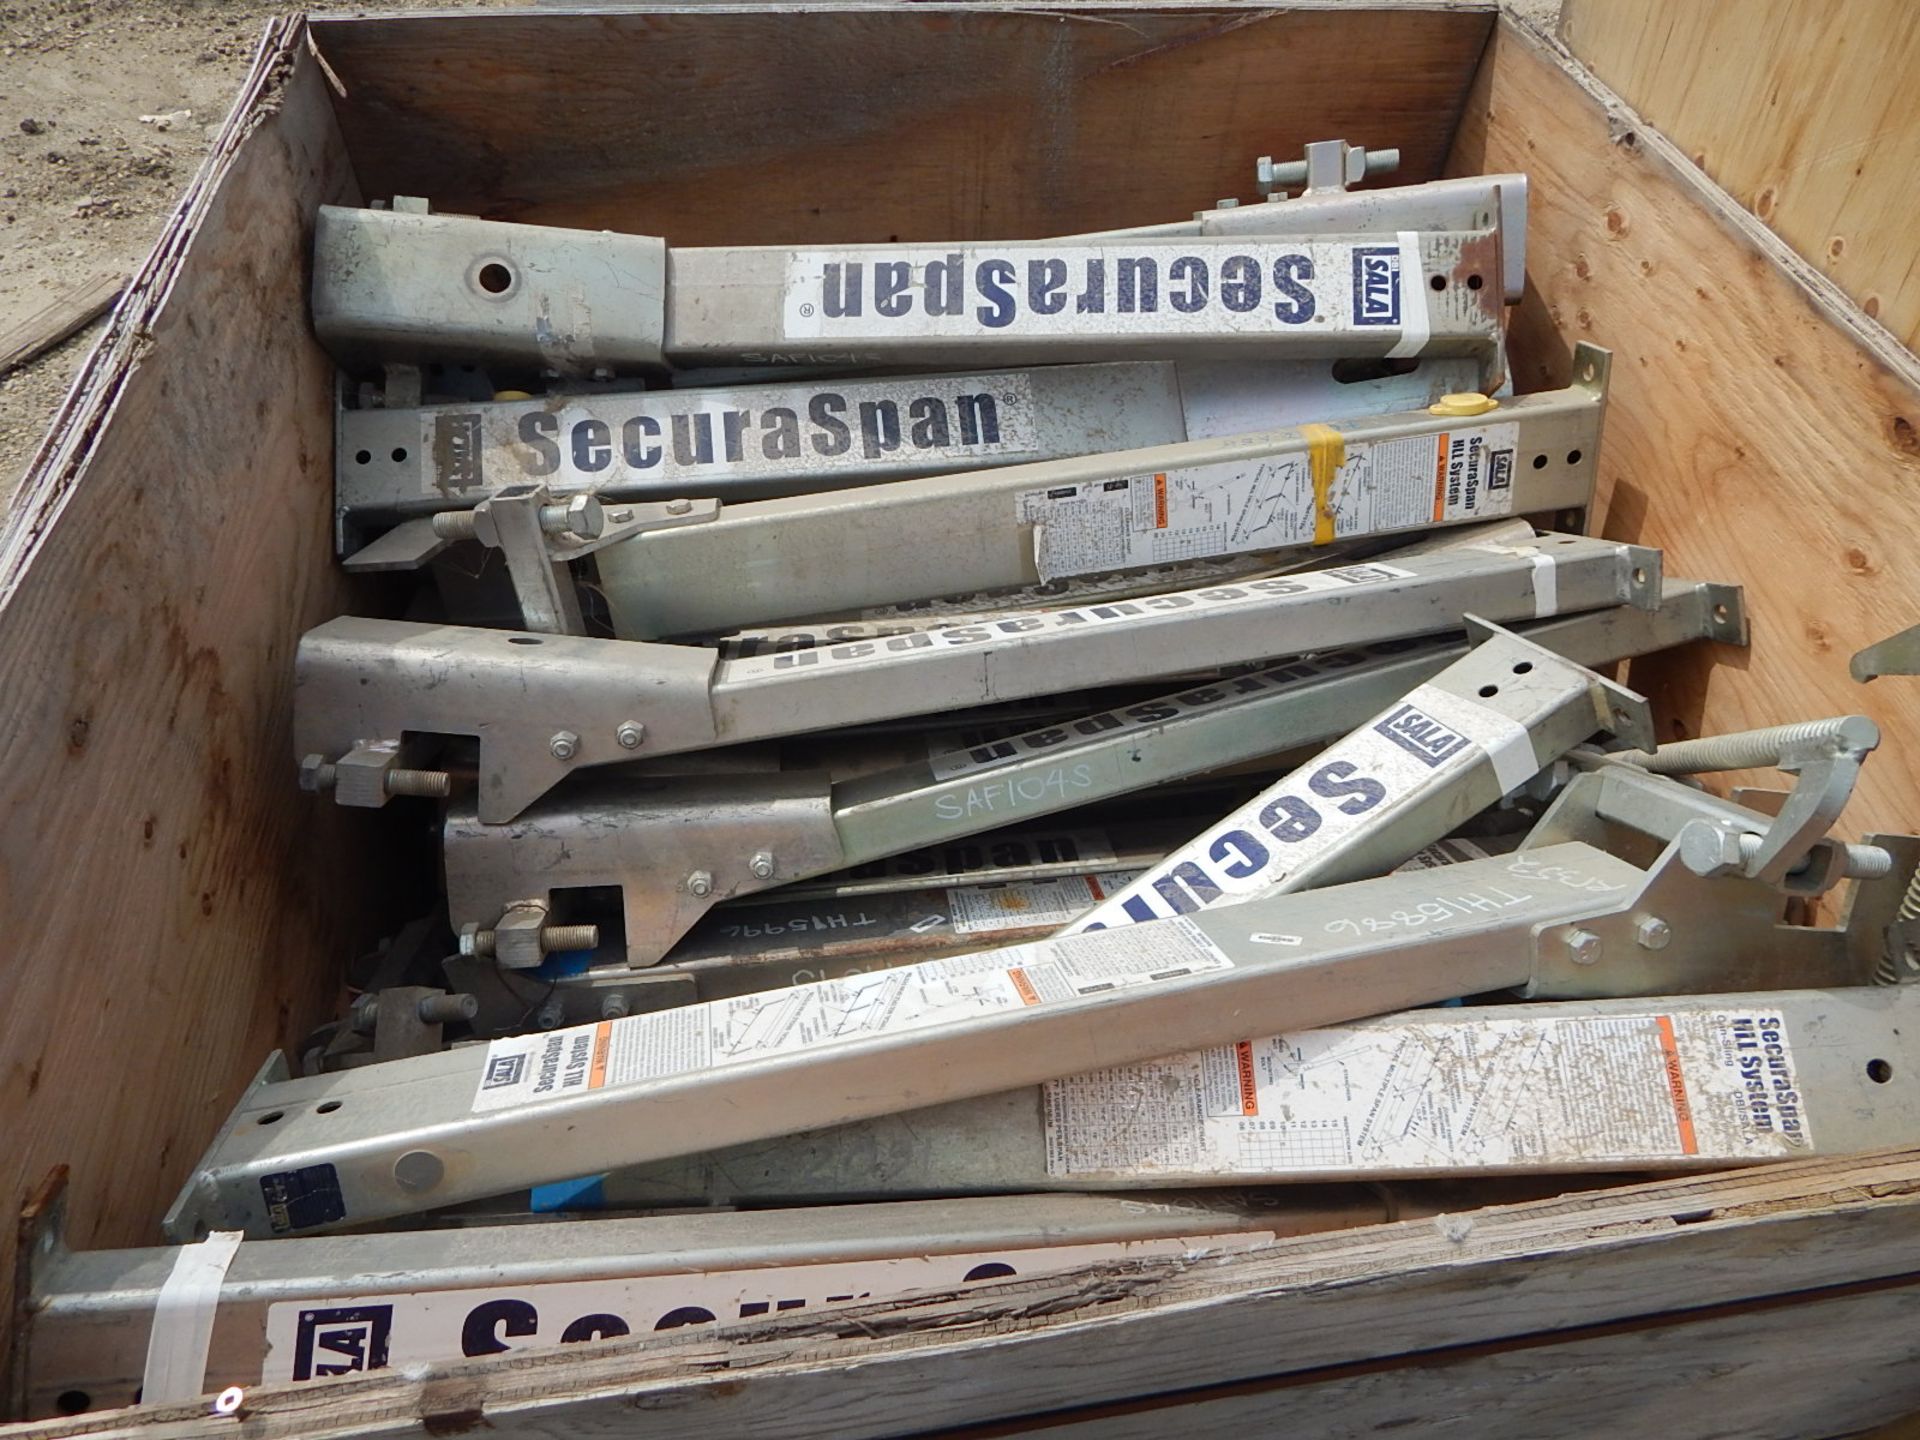 LOT/ CONTENTS OF CRATE CONSISTING OF SALA HLL SECURASPAN STANCHIONS - Image 2 of 2